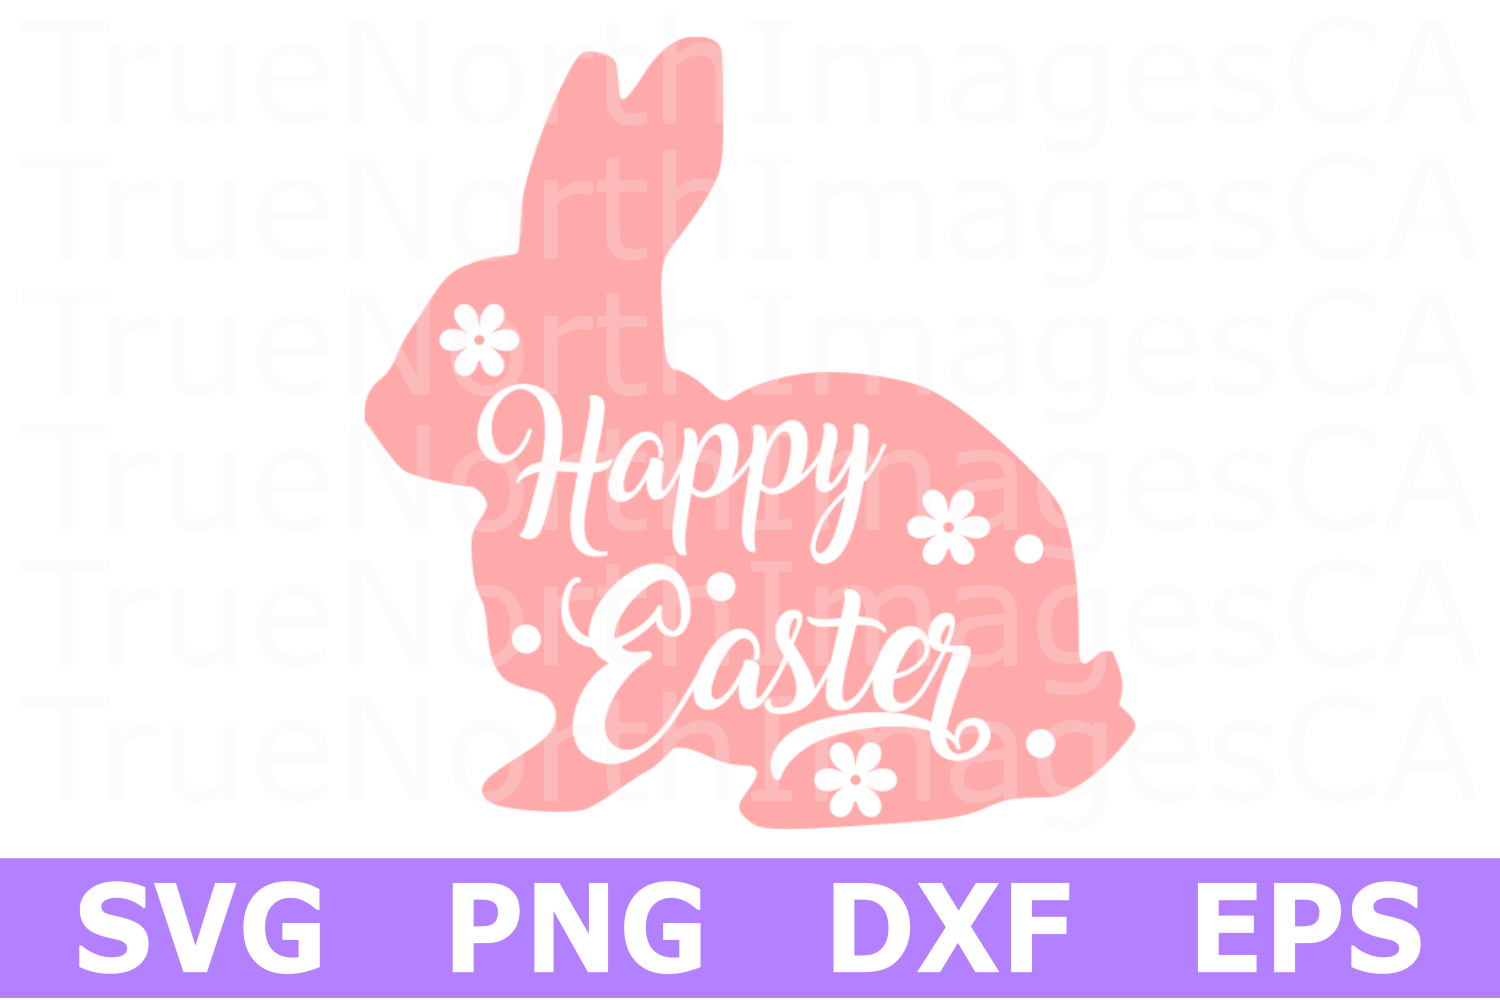 Happy Easter Bunny Silhouette - An Easter SVG Cut File